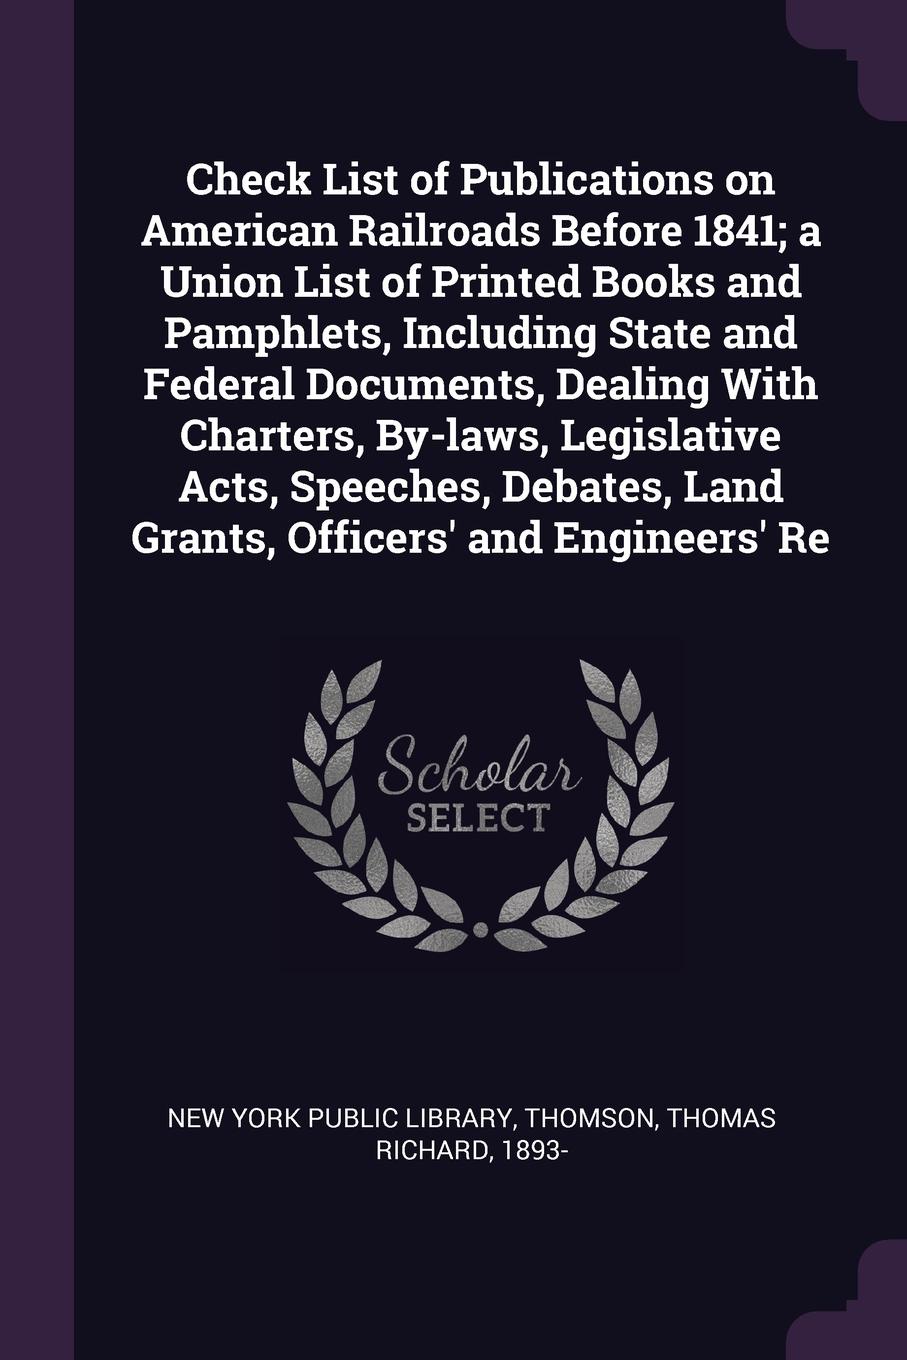 Check List of Publications on American Railroads Before 1841; a Union List of Printed Books and Pamphlets, Including State and Federal Documents, Dealing With Charters, By-laws, Legislative Acts, Speeches, Debates, Land Grants, Officers` and Engin...